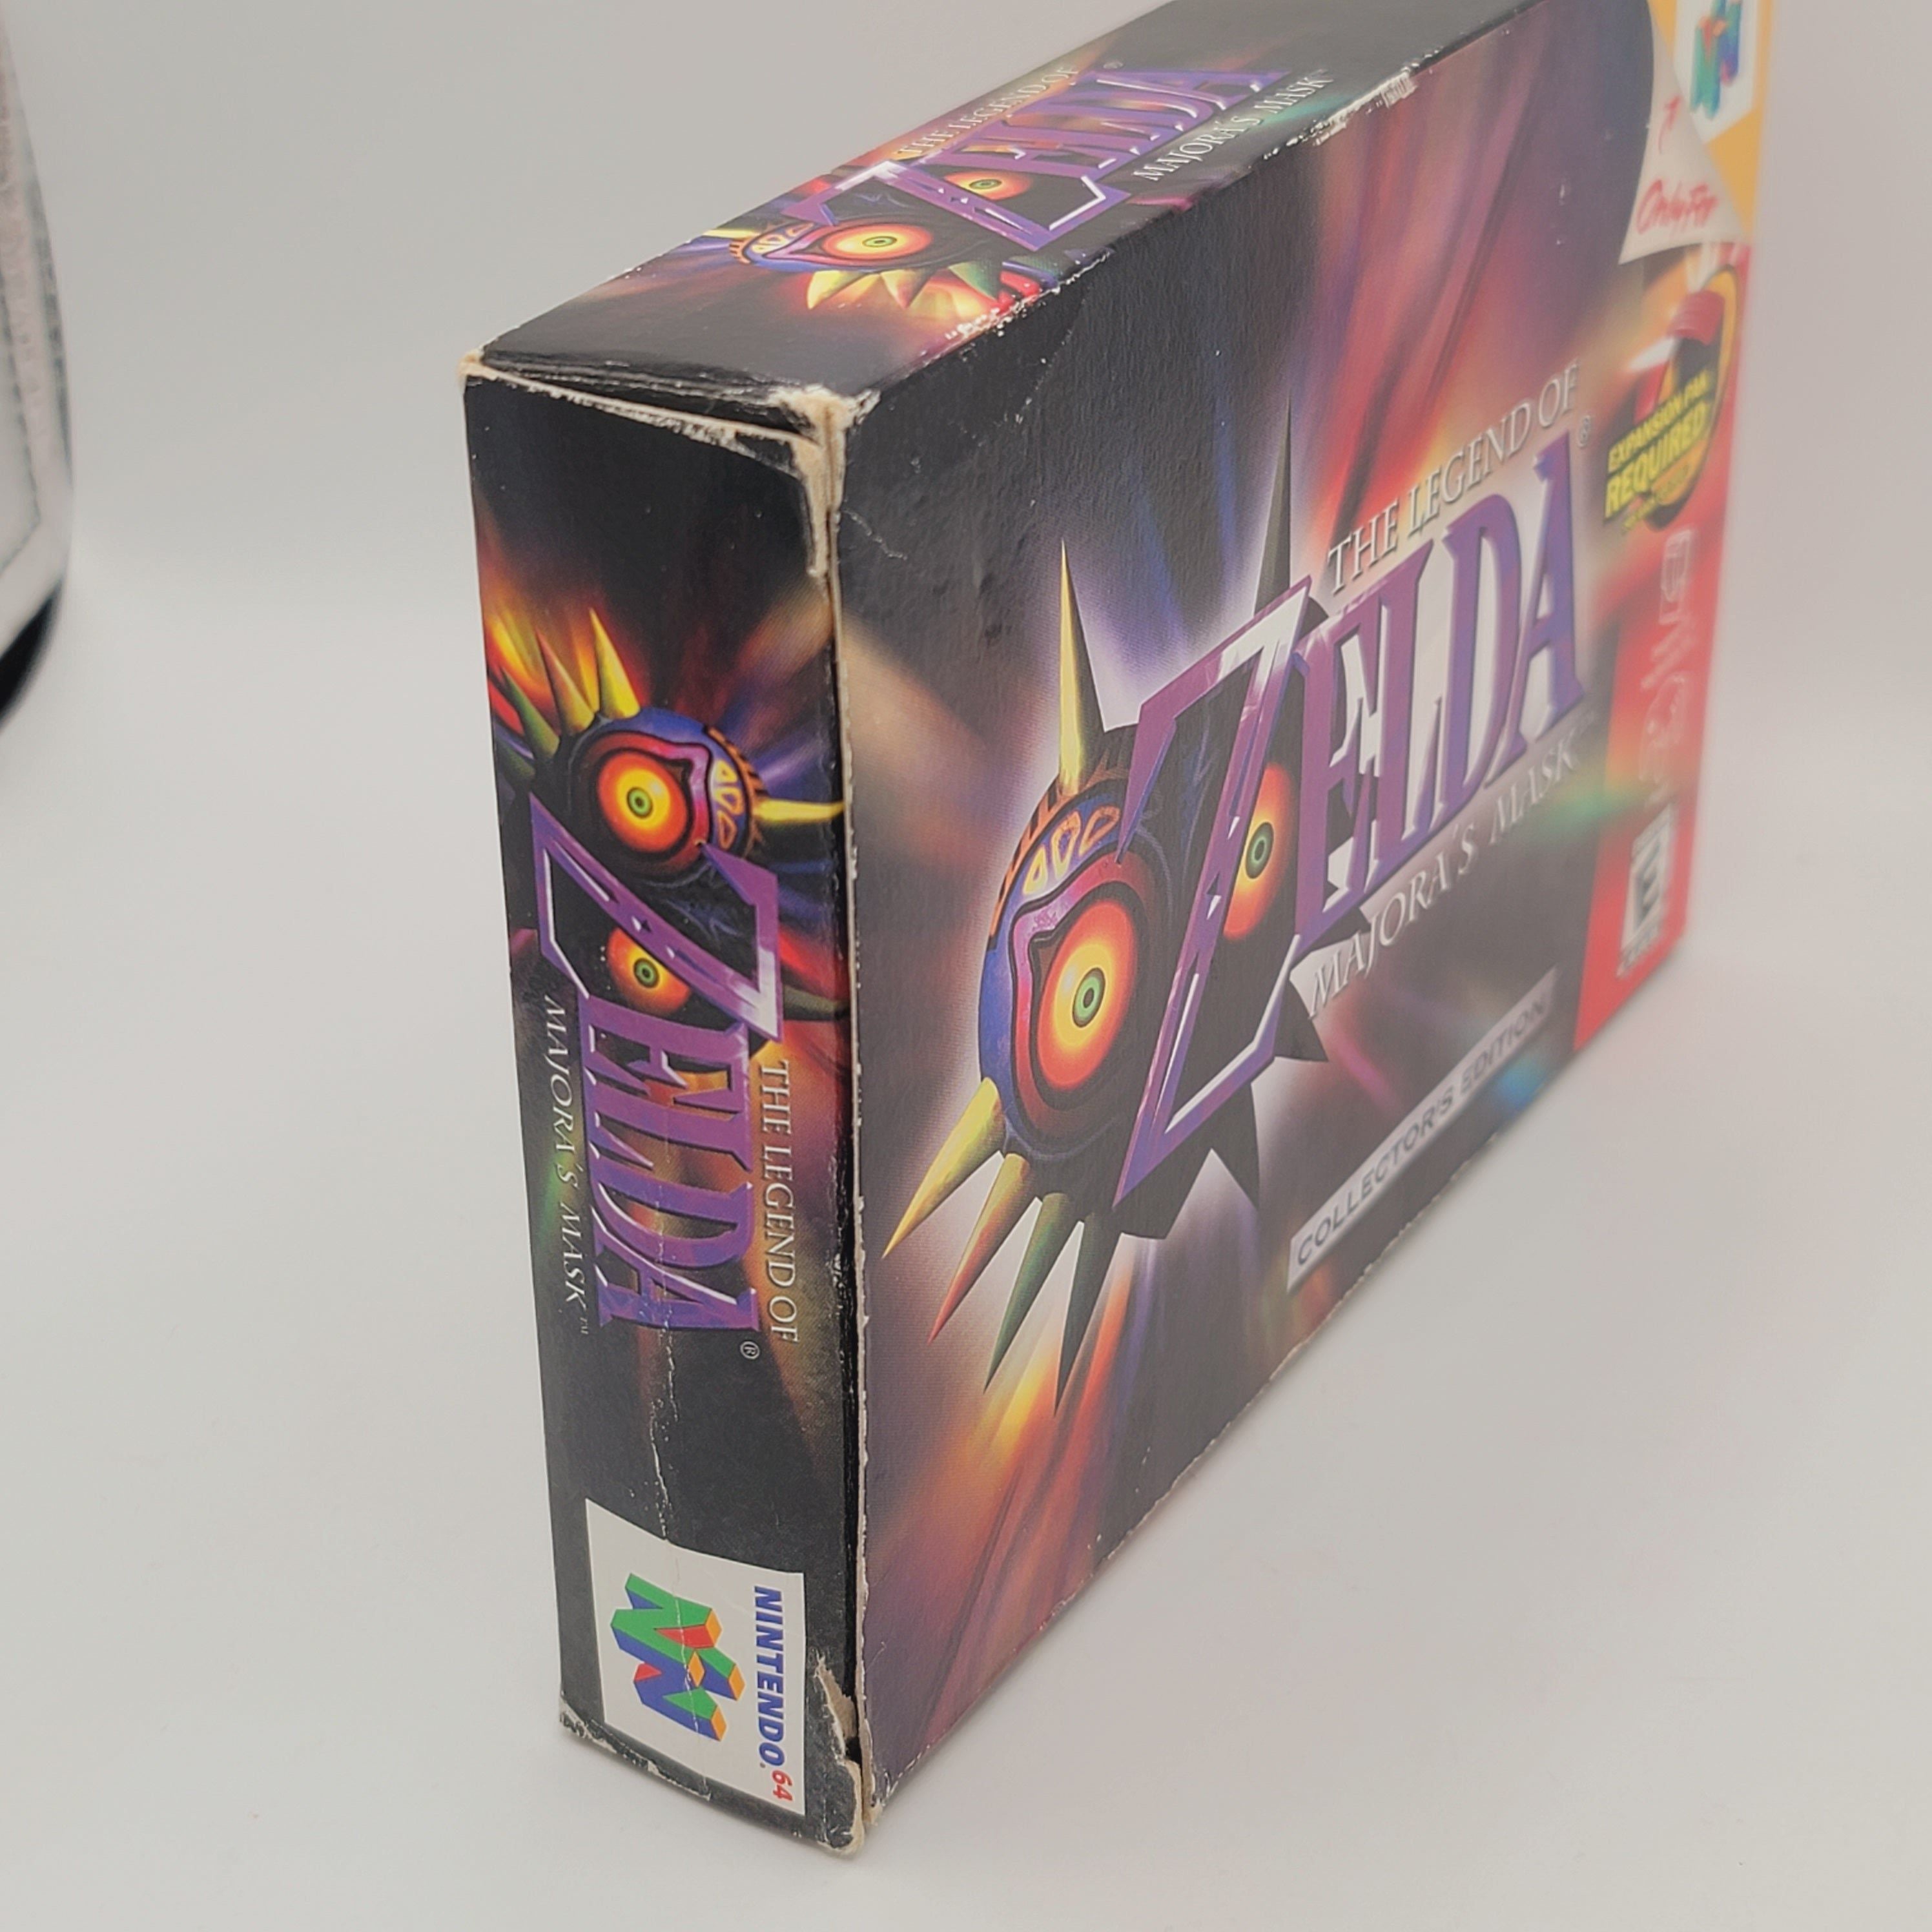 N64 - The Legend of Zelda Majora's Mask Collector's Edition (Complete in Box / B / With Manual)